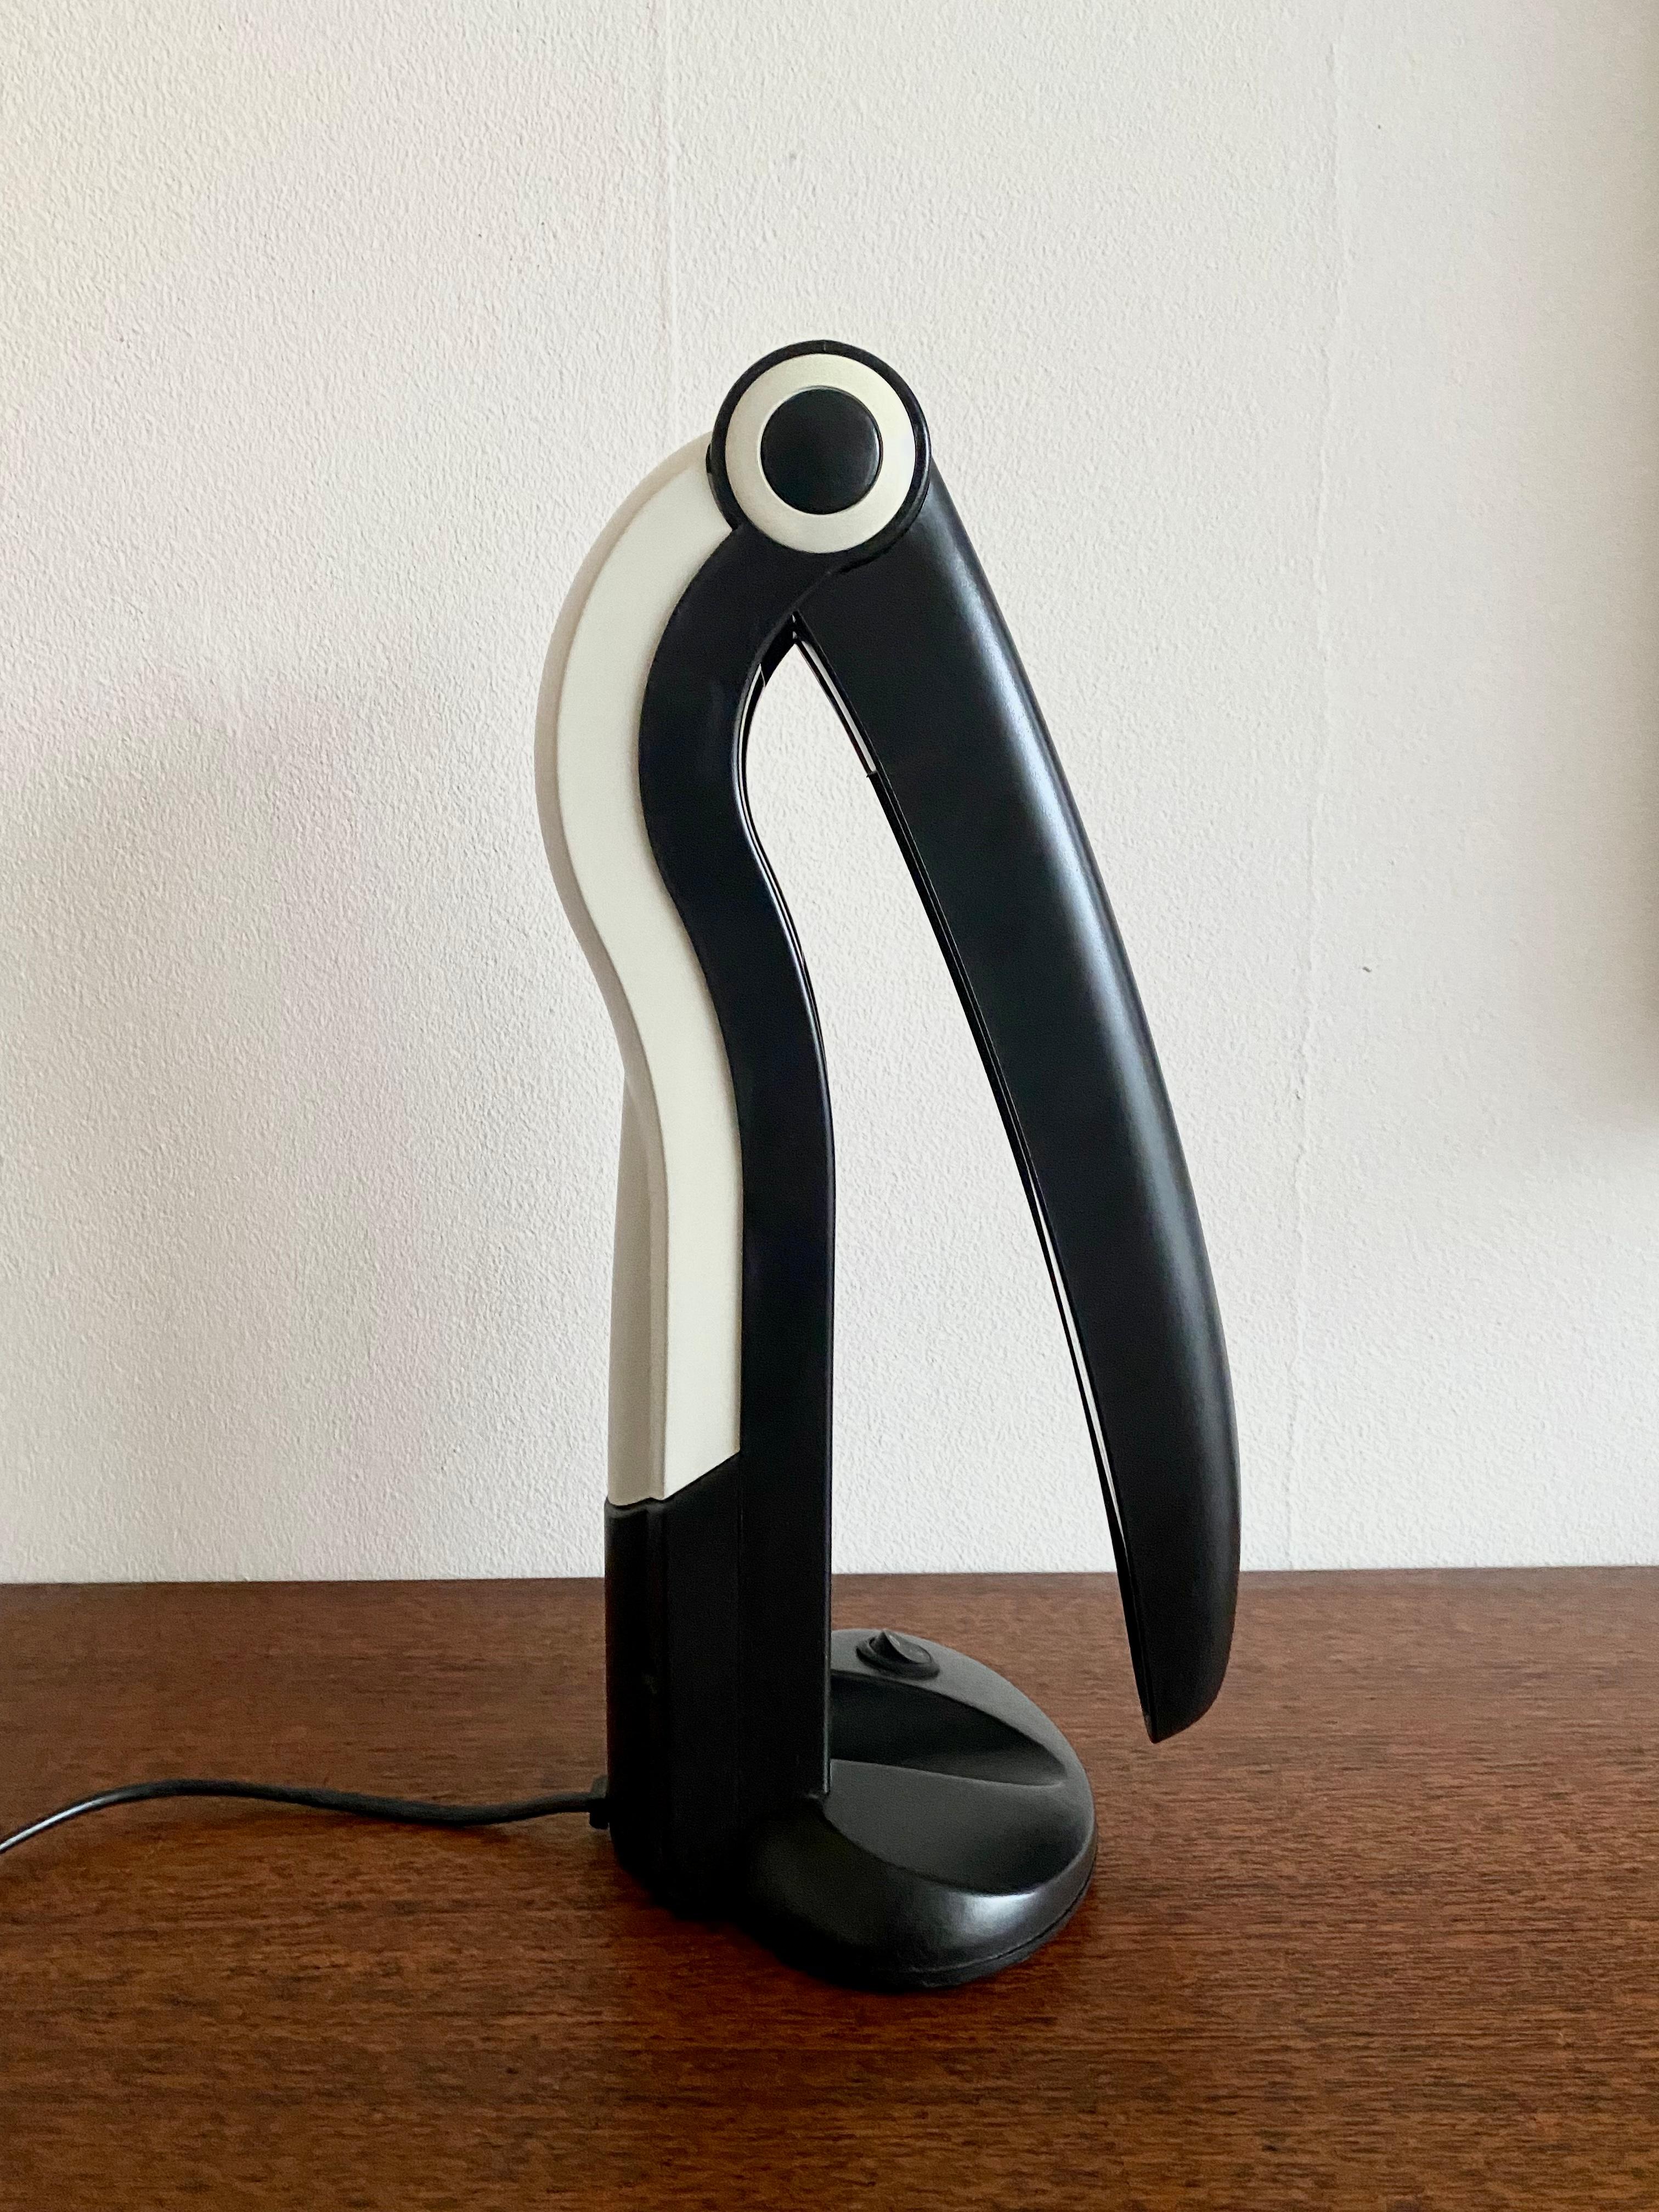 Beautiful table or desk lamp Designed by H.T. Huang in ca. the 1980s Taiwan. The light source is integrated within the beak wich is adjustable. The piece remains in very nice condition with normal wear consisting with age and use. measurements in